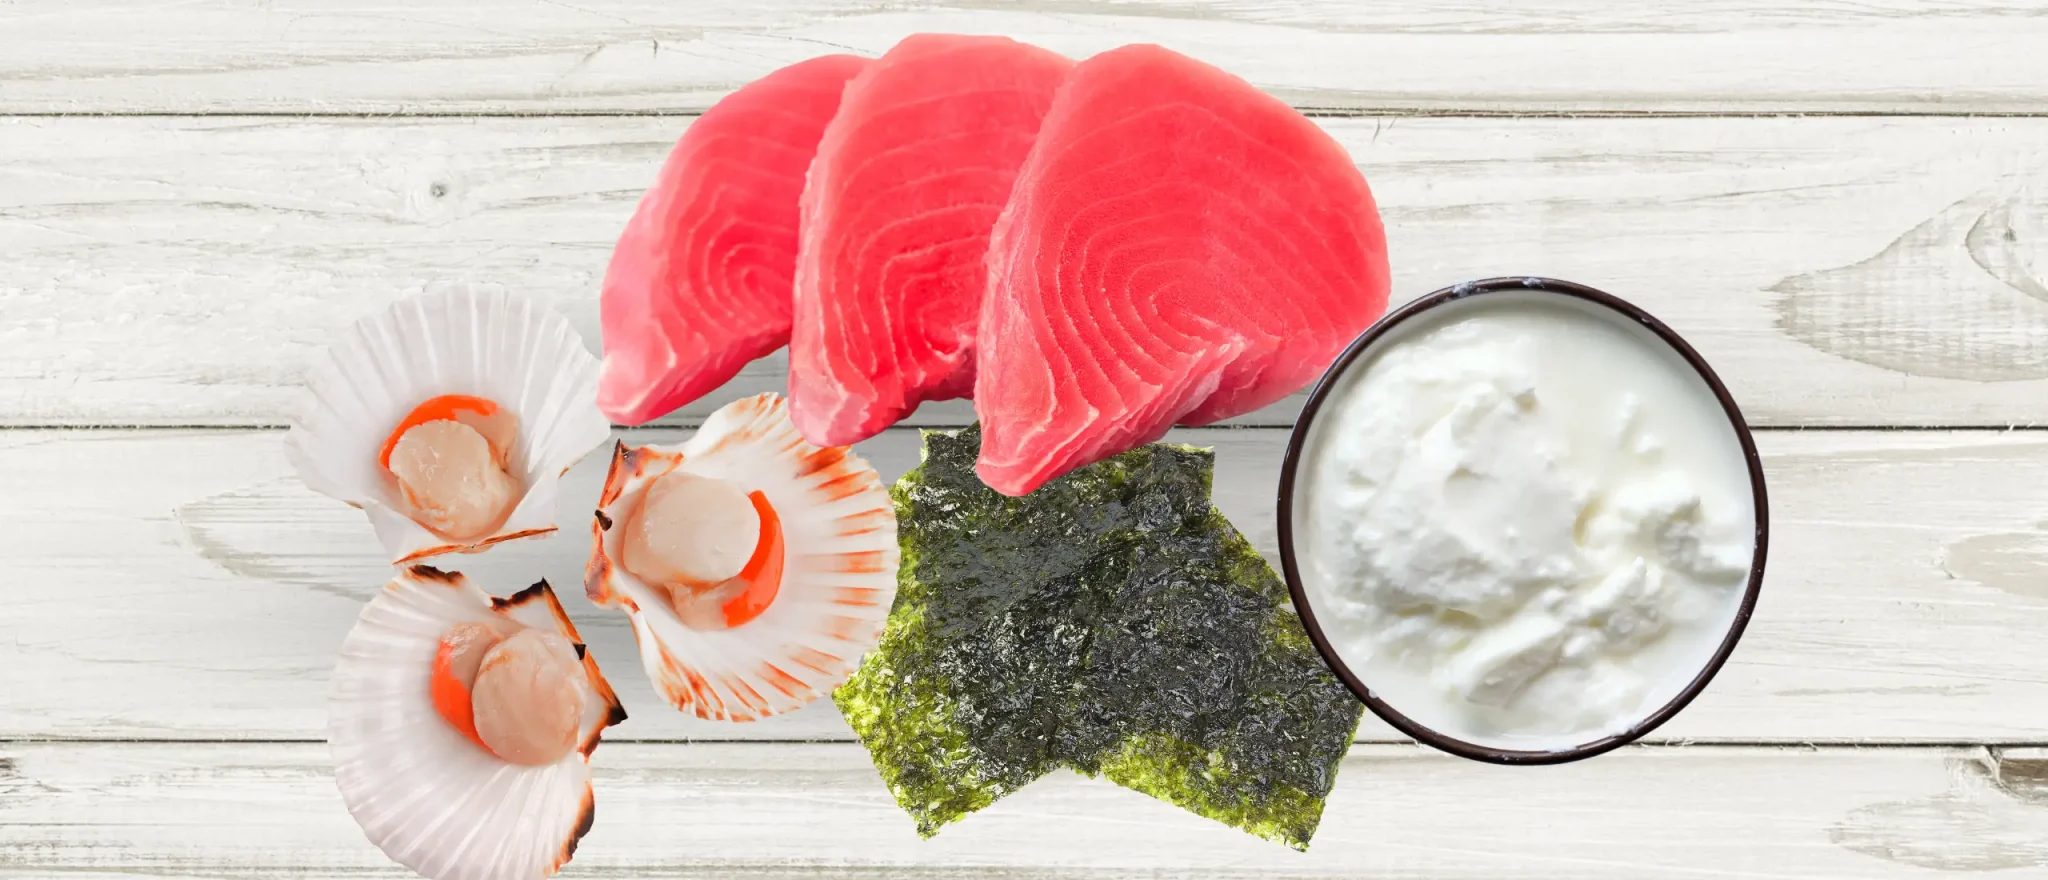 9 Foods With Taurine, an Amino Acid That Might Help You Live Longer